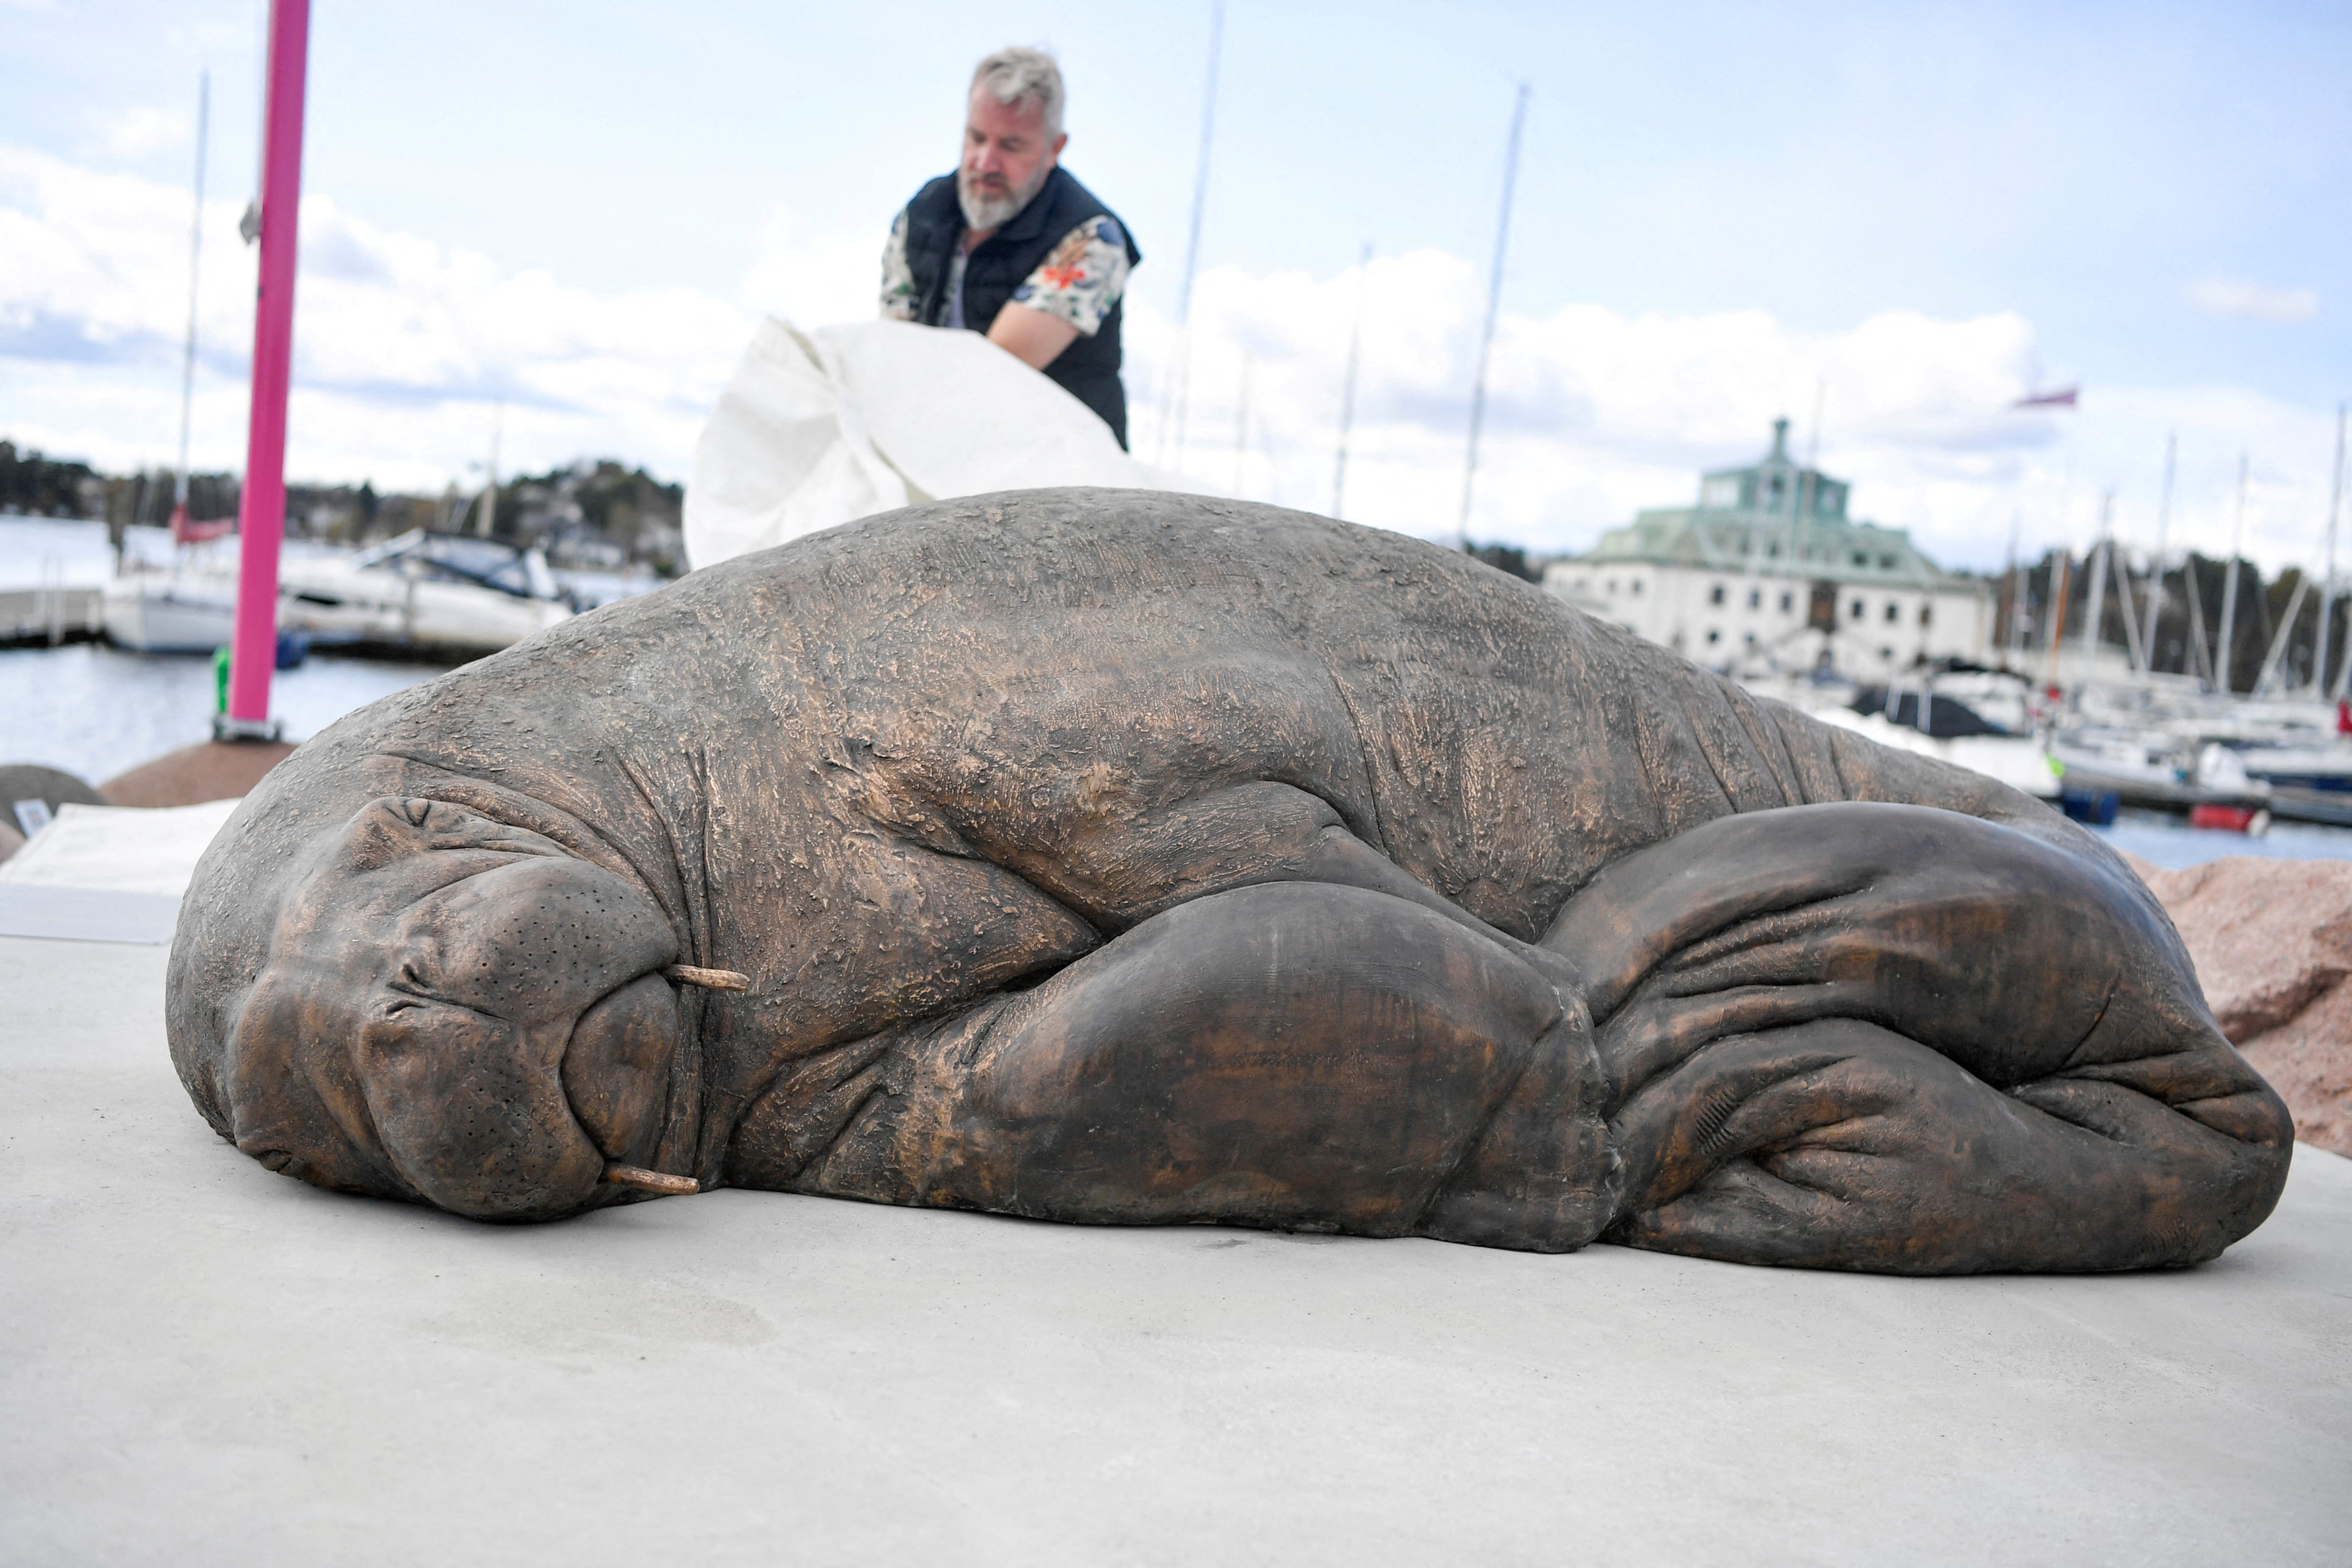 The sculpture of Freya the walrus, made by the artist Astri Tonoian is unveiled at Kongen Marina by Frognerkilen, Oslo, Norway on Saturday. Photo: NTB / Annika Byrde via Reuters